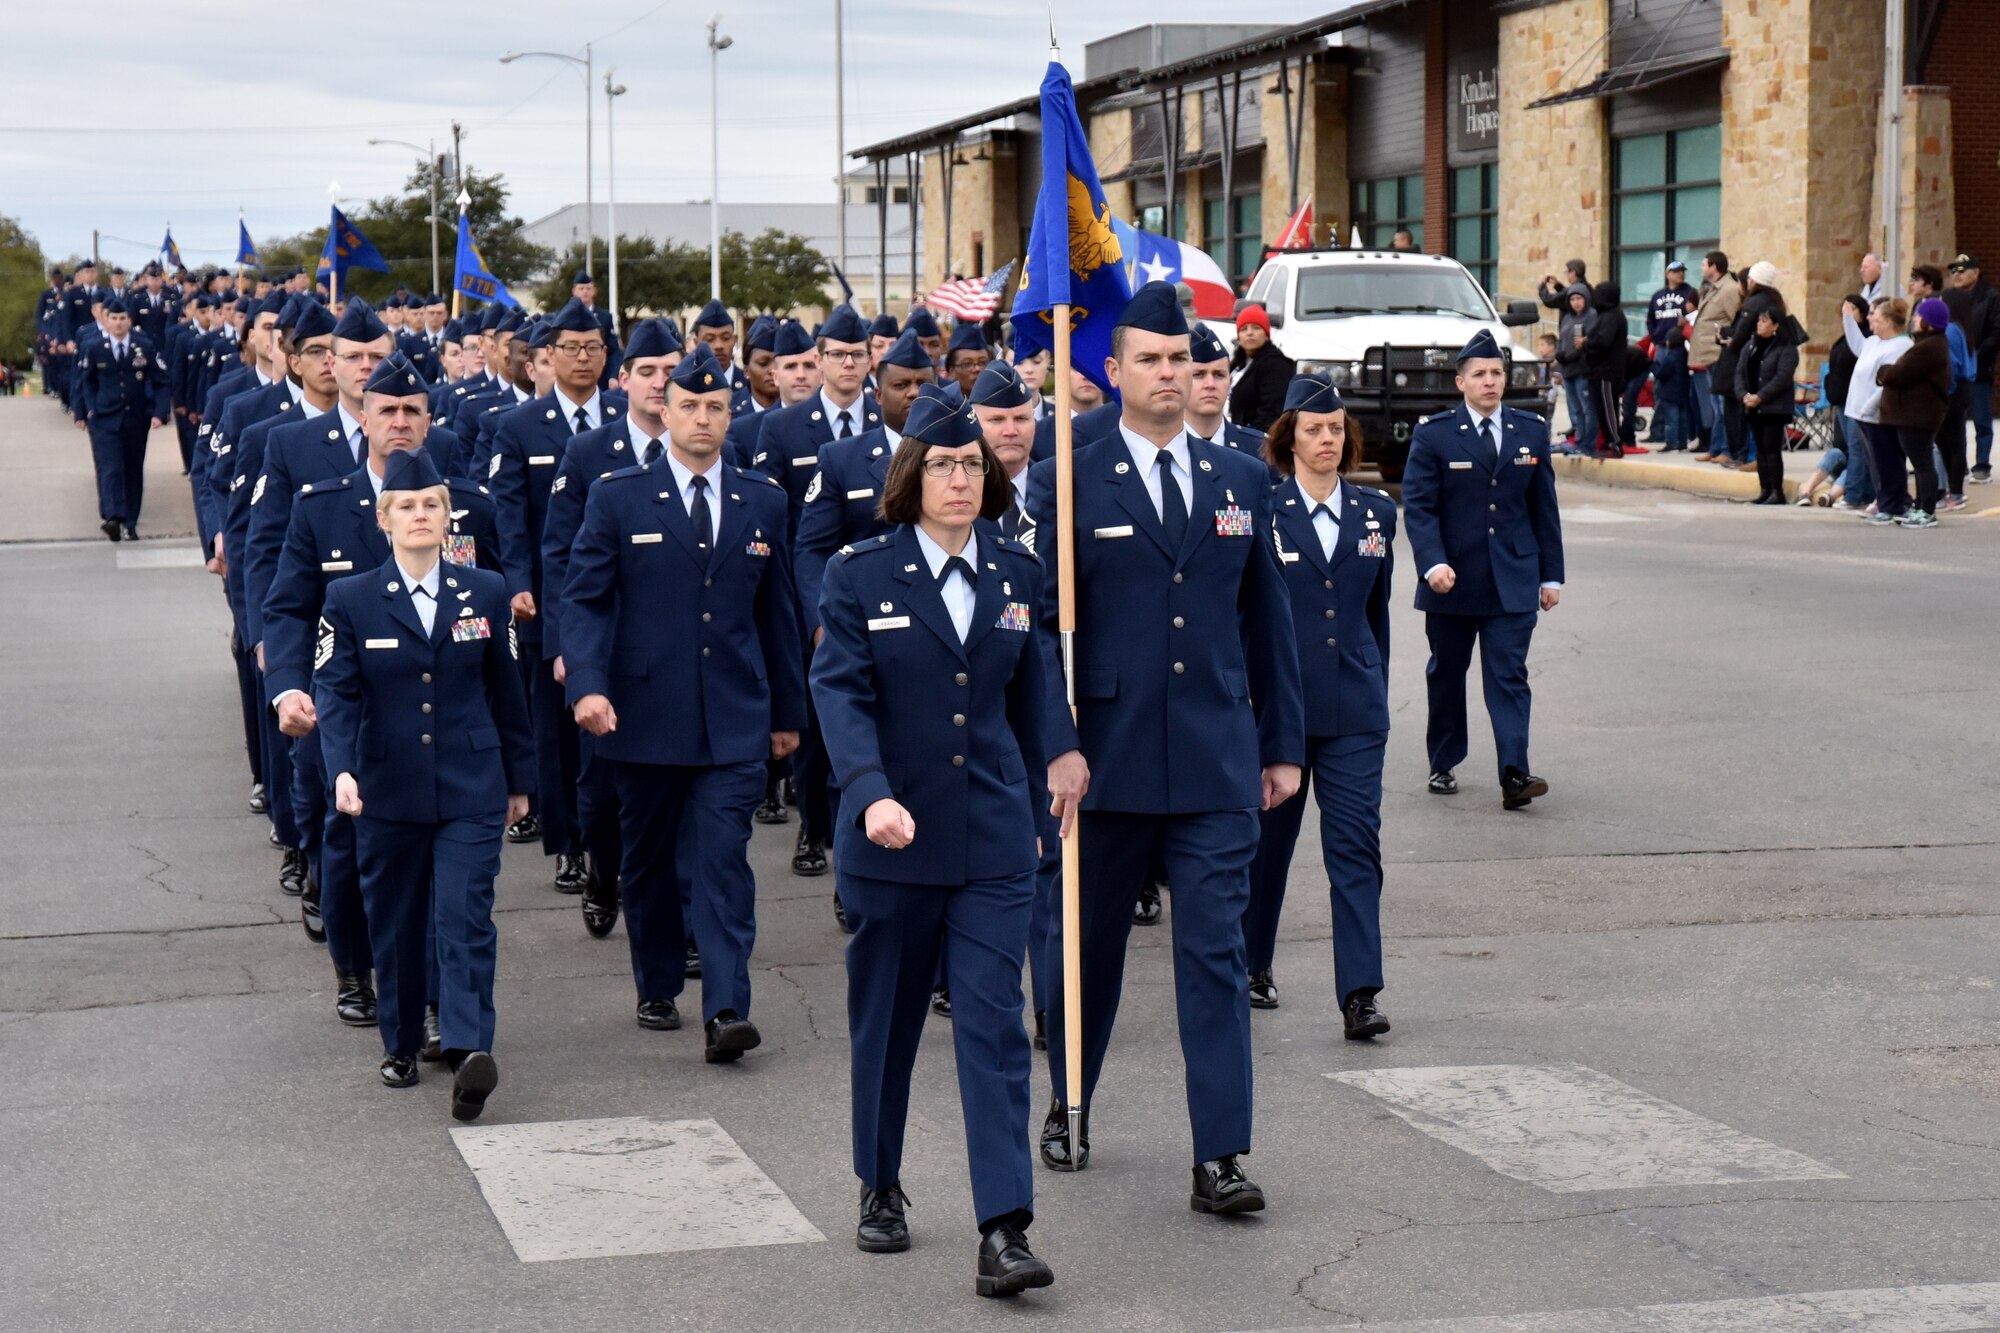 Airmen from the 17th Medical Group march in the Veterans Day Parade in San Angelo, Texas, Nov. 10, 2018. The parade featured veterans, active duty members and other organizations. (U.S. Air Force photo by 2nd Lt. Matthew Stott/Released)